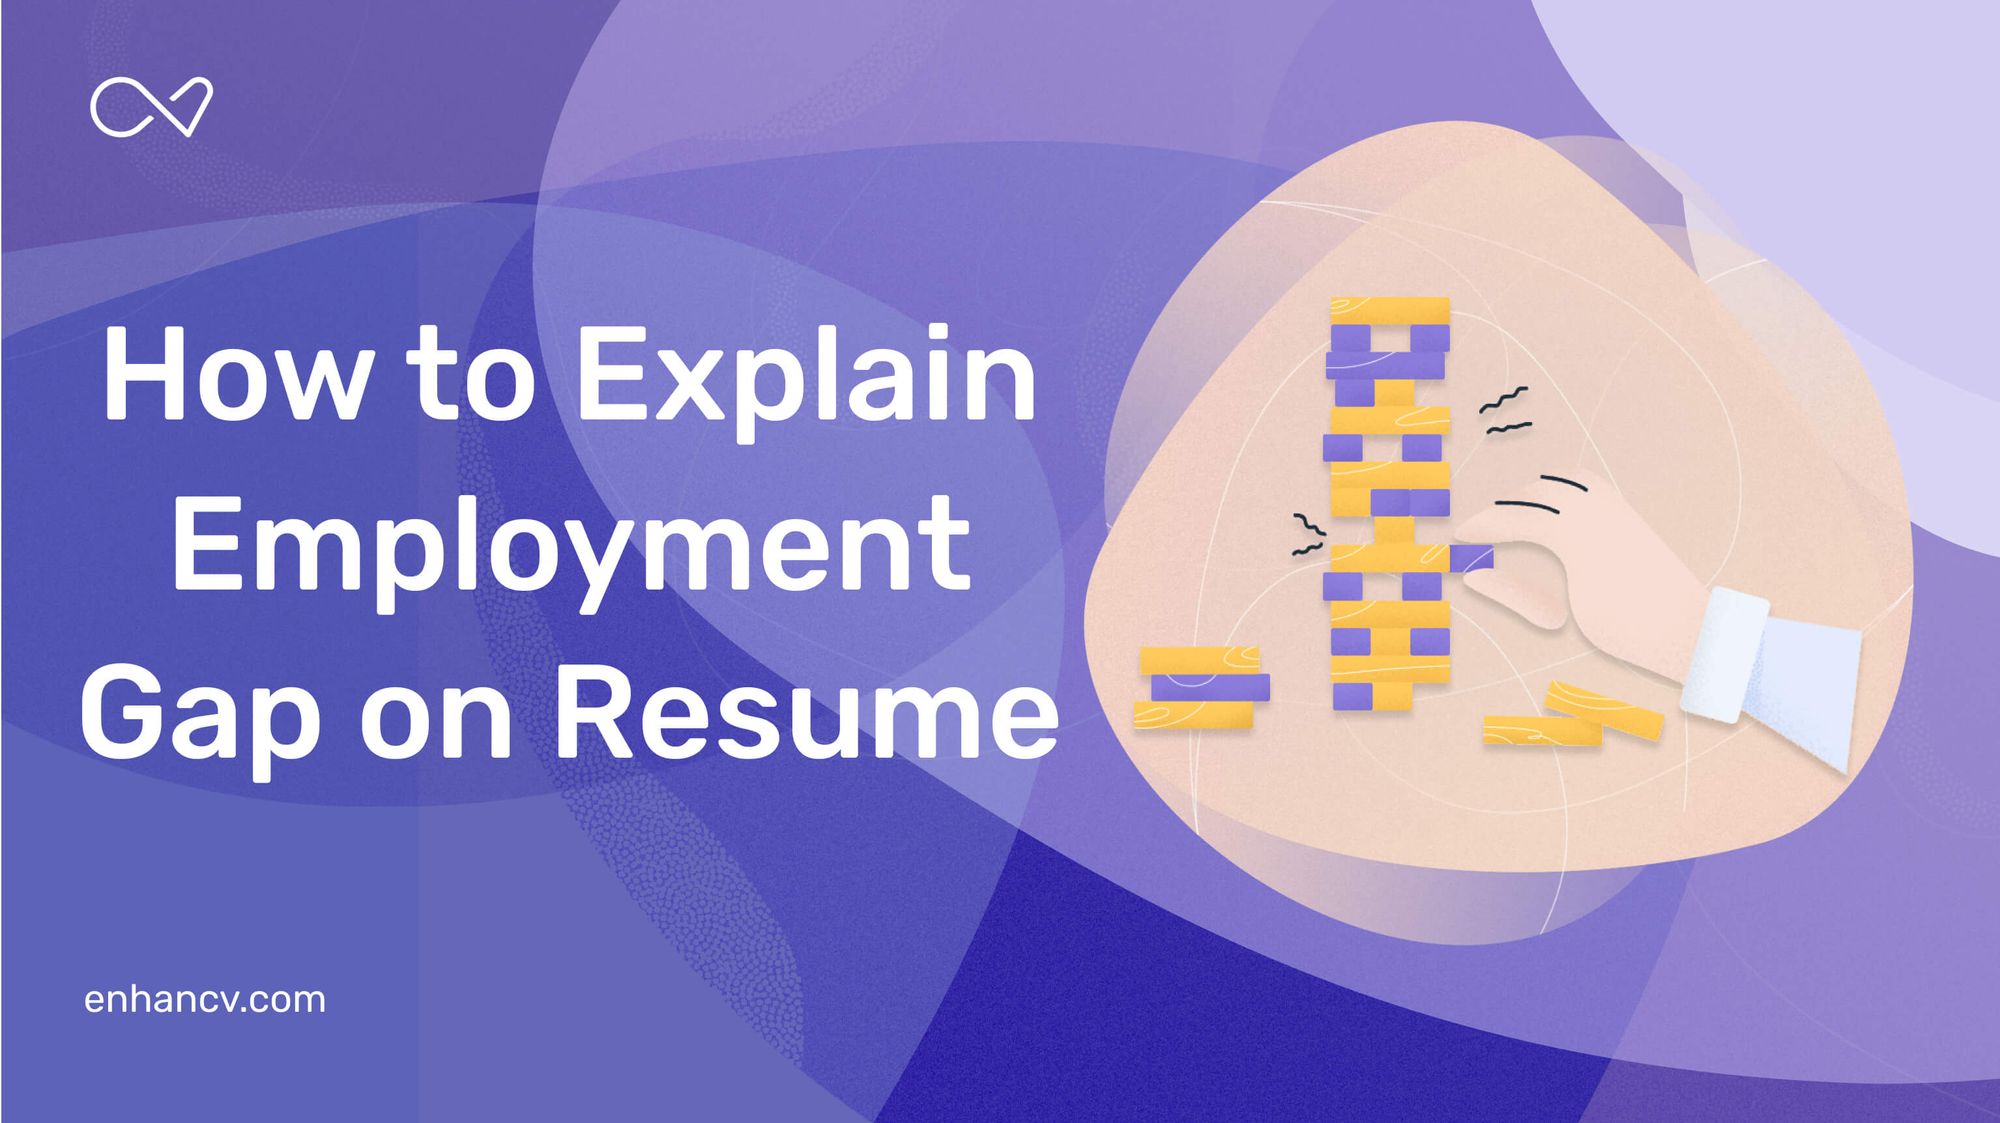 How to Explain Employment Gap on Resume